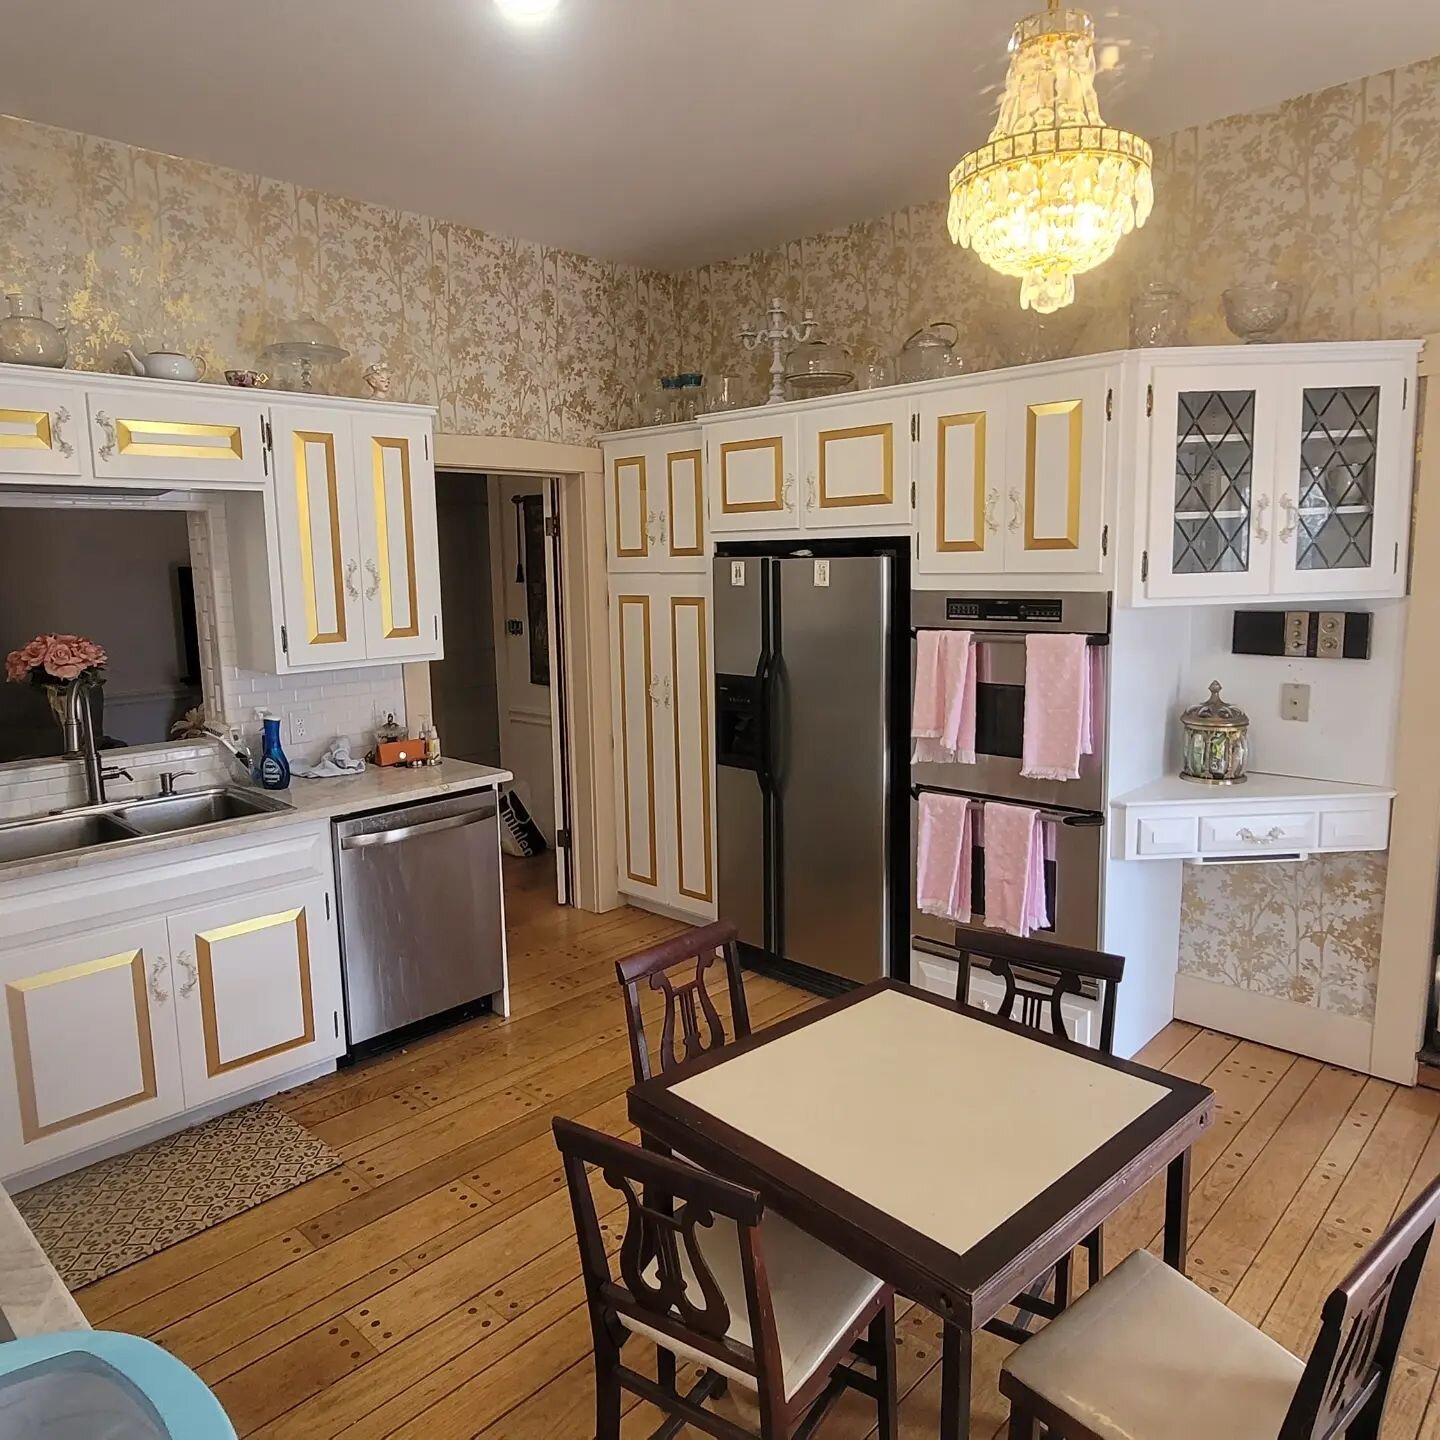 One recent project was this kitchen in a super sweet 1800's home! What the what....yeah that's right, late 1800's located in the city of Missouri's state capital, Jefferson City. Flip through to see before and during prep stage photos. 

Maybe the de